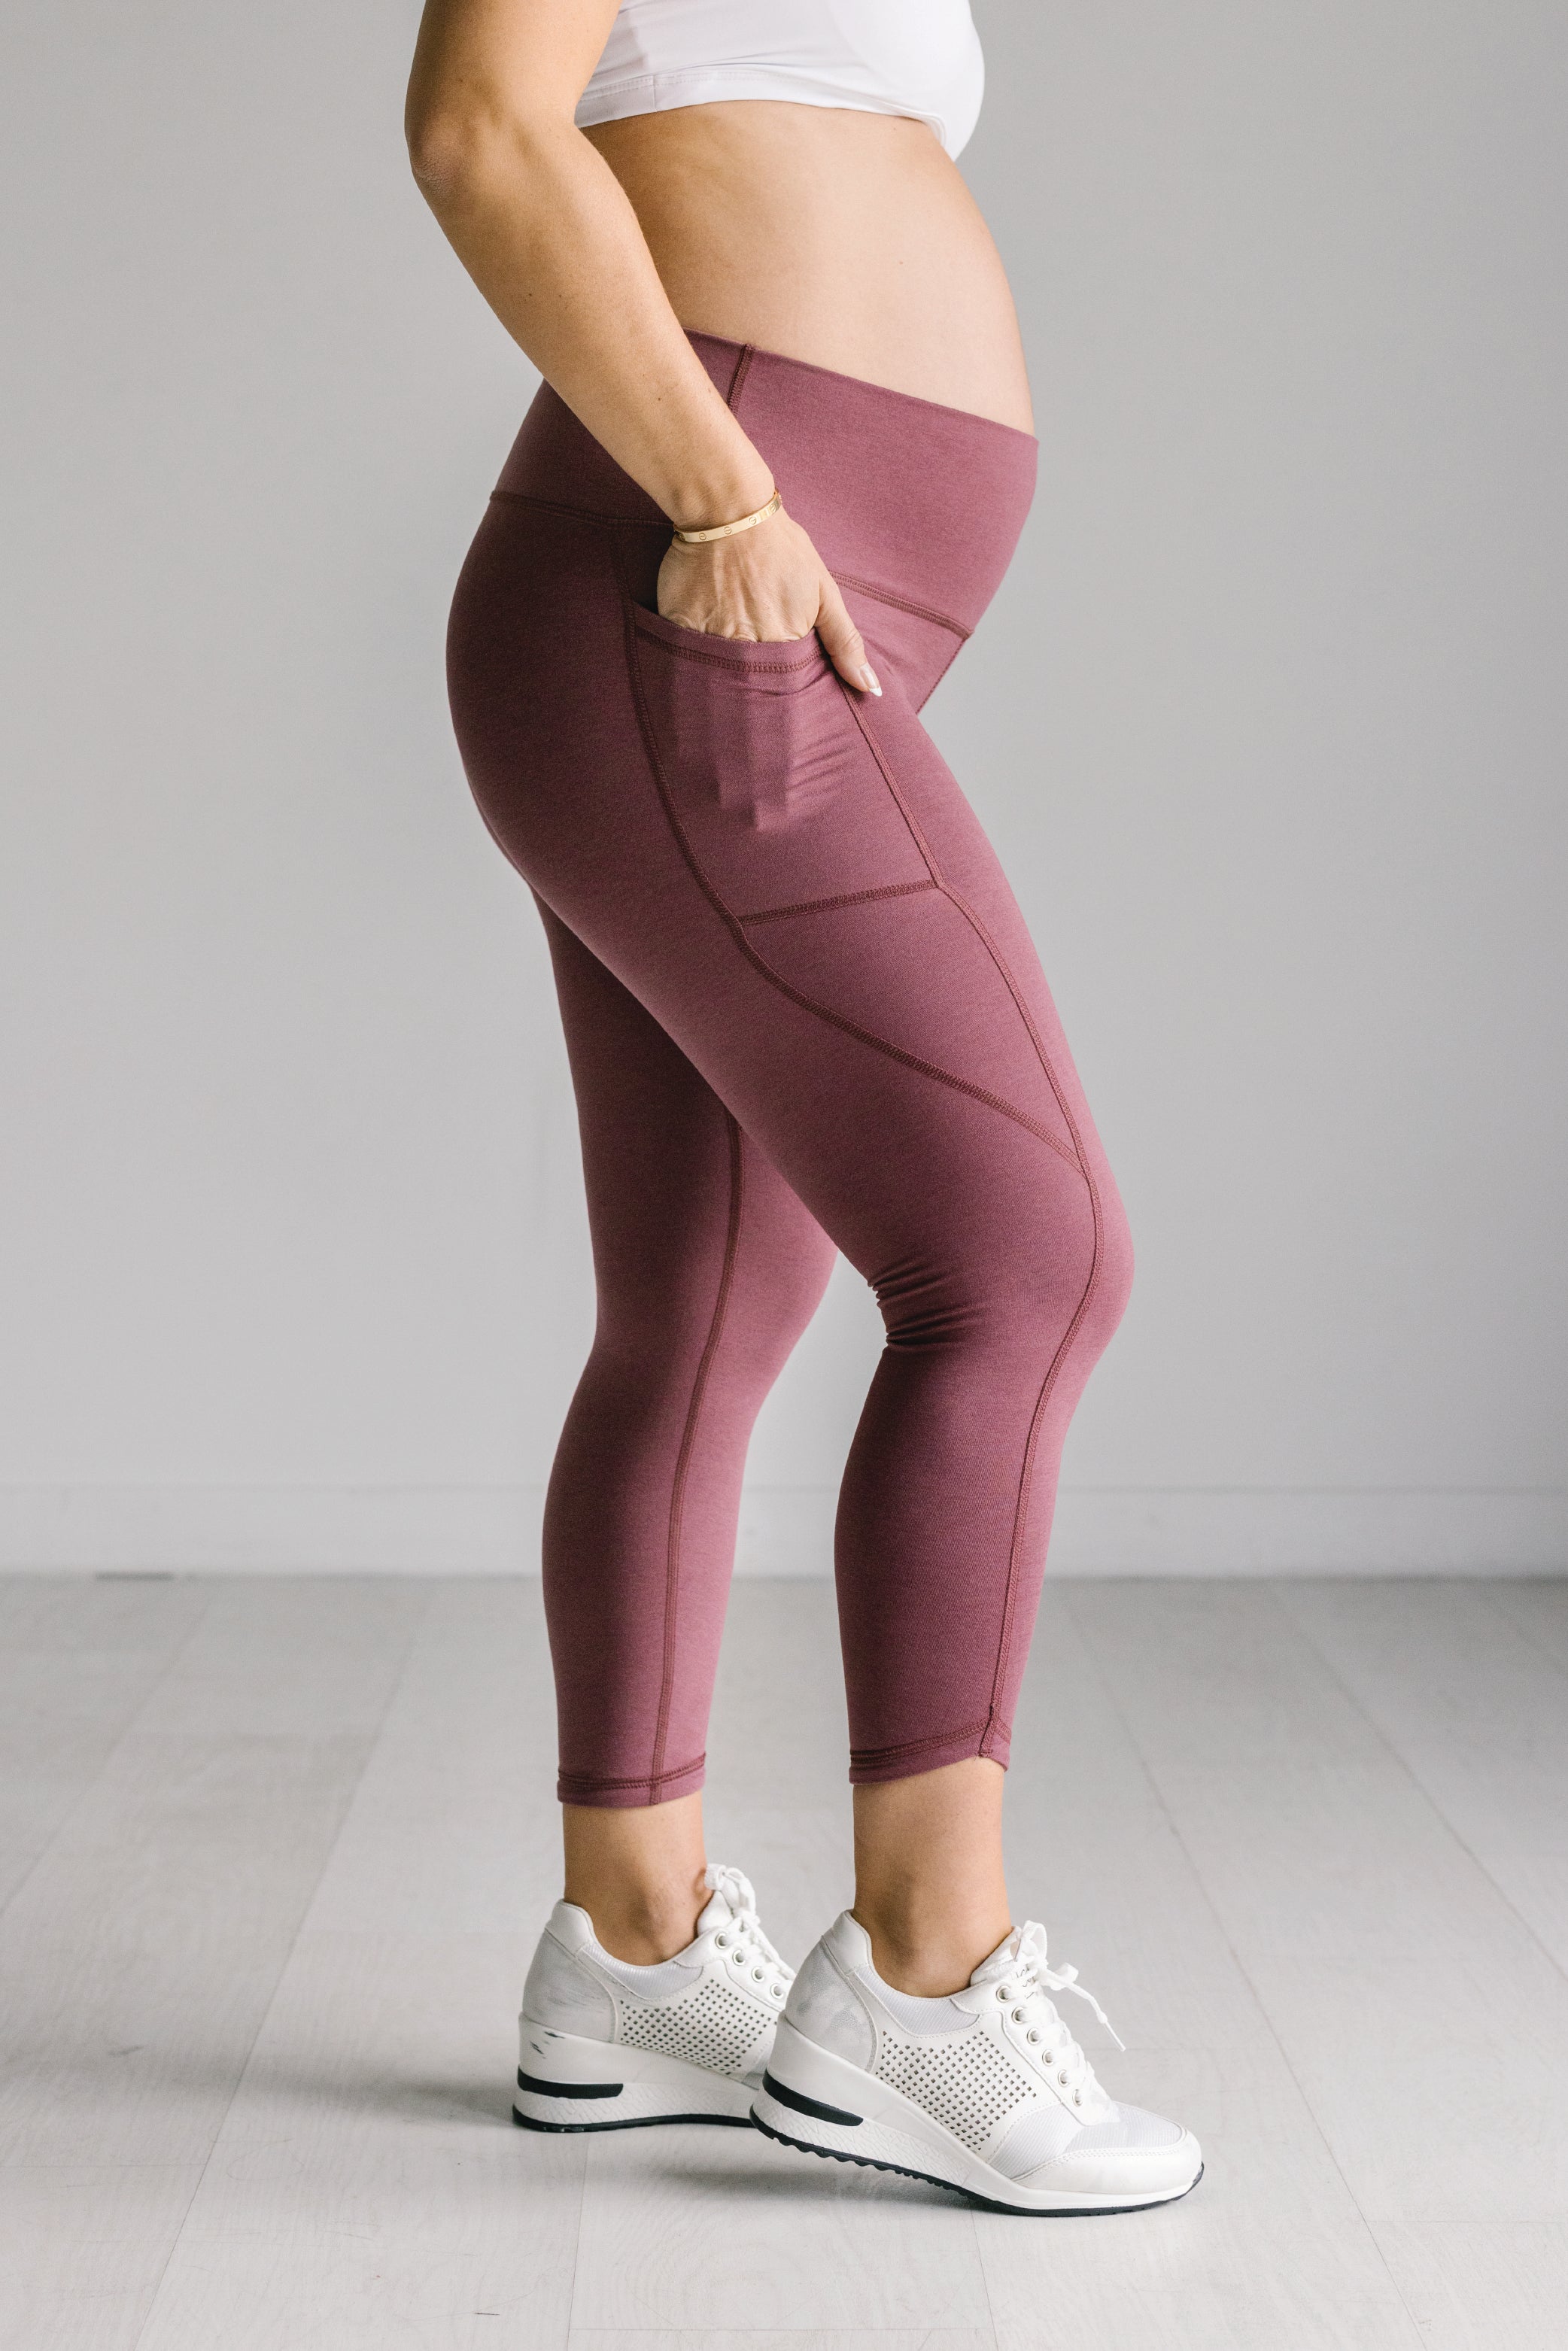 11 Best Maternity Yoga Pants + Leggings [Petite, Tall, + Plus Size  Options!] - The Confused Millennial